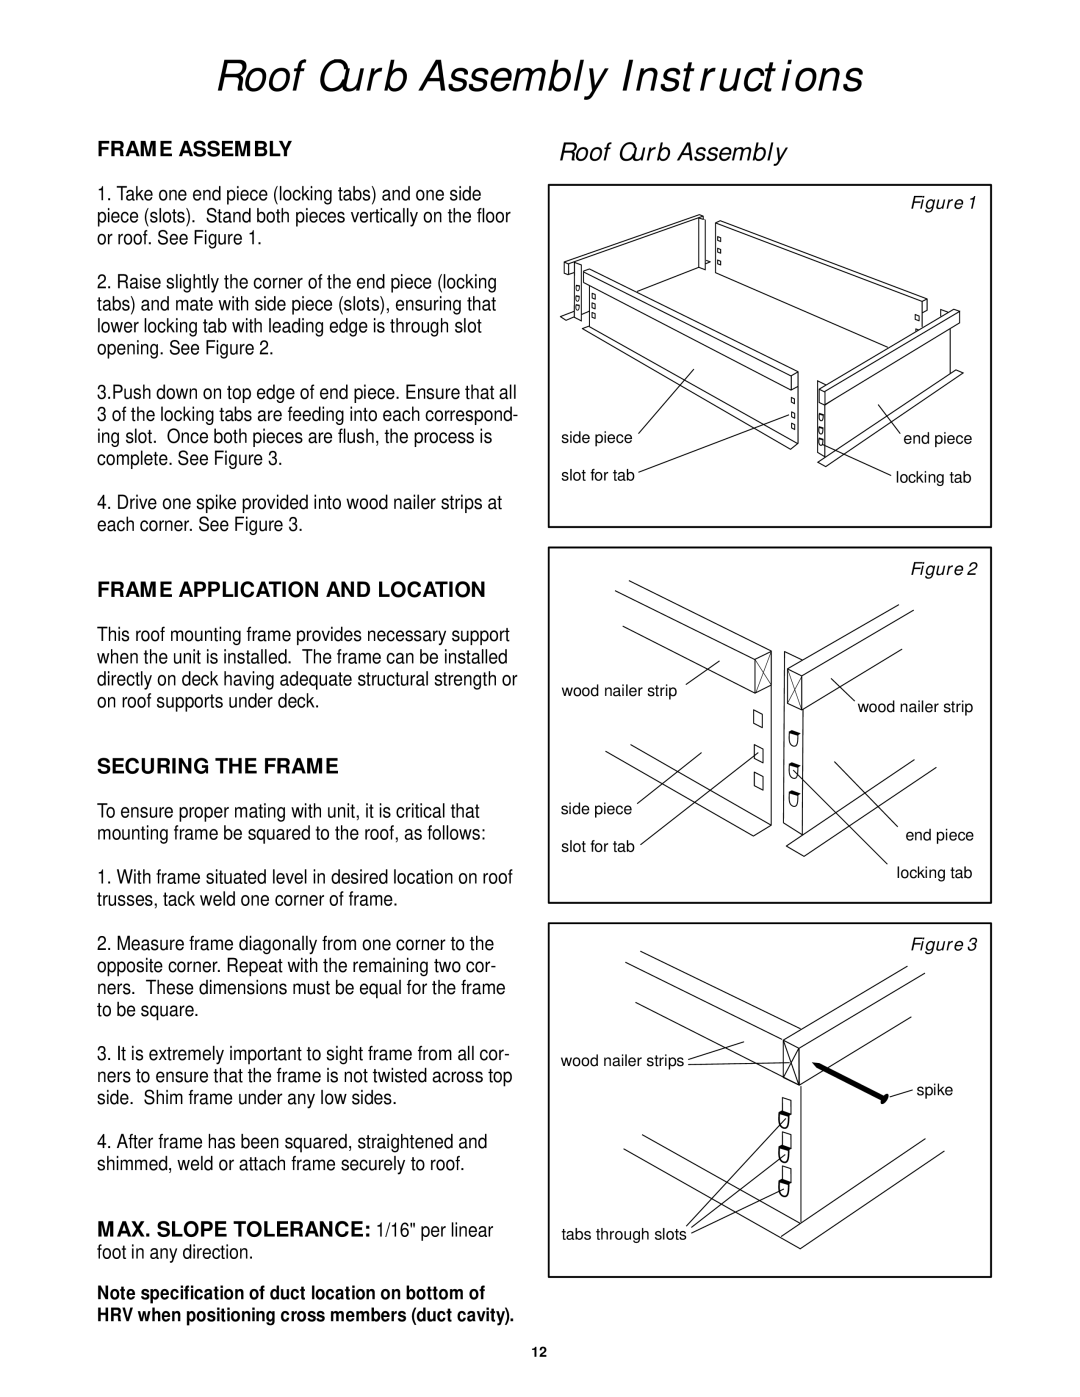 Lifebreath 2500IFD Roof Curb Assembly Instructions, Frame Assembly, Frame Application And Location, Securing The Frame 